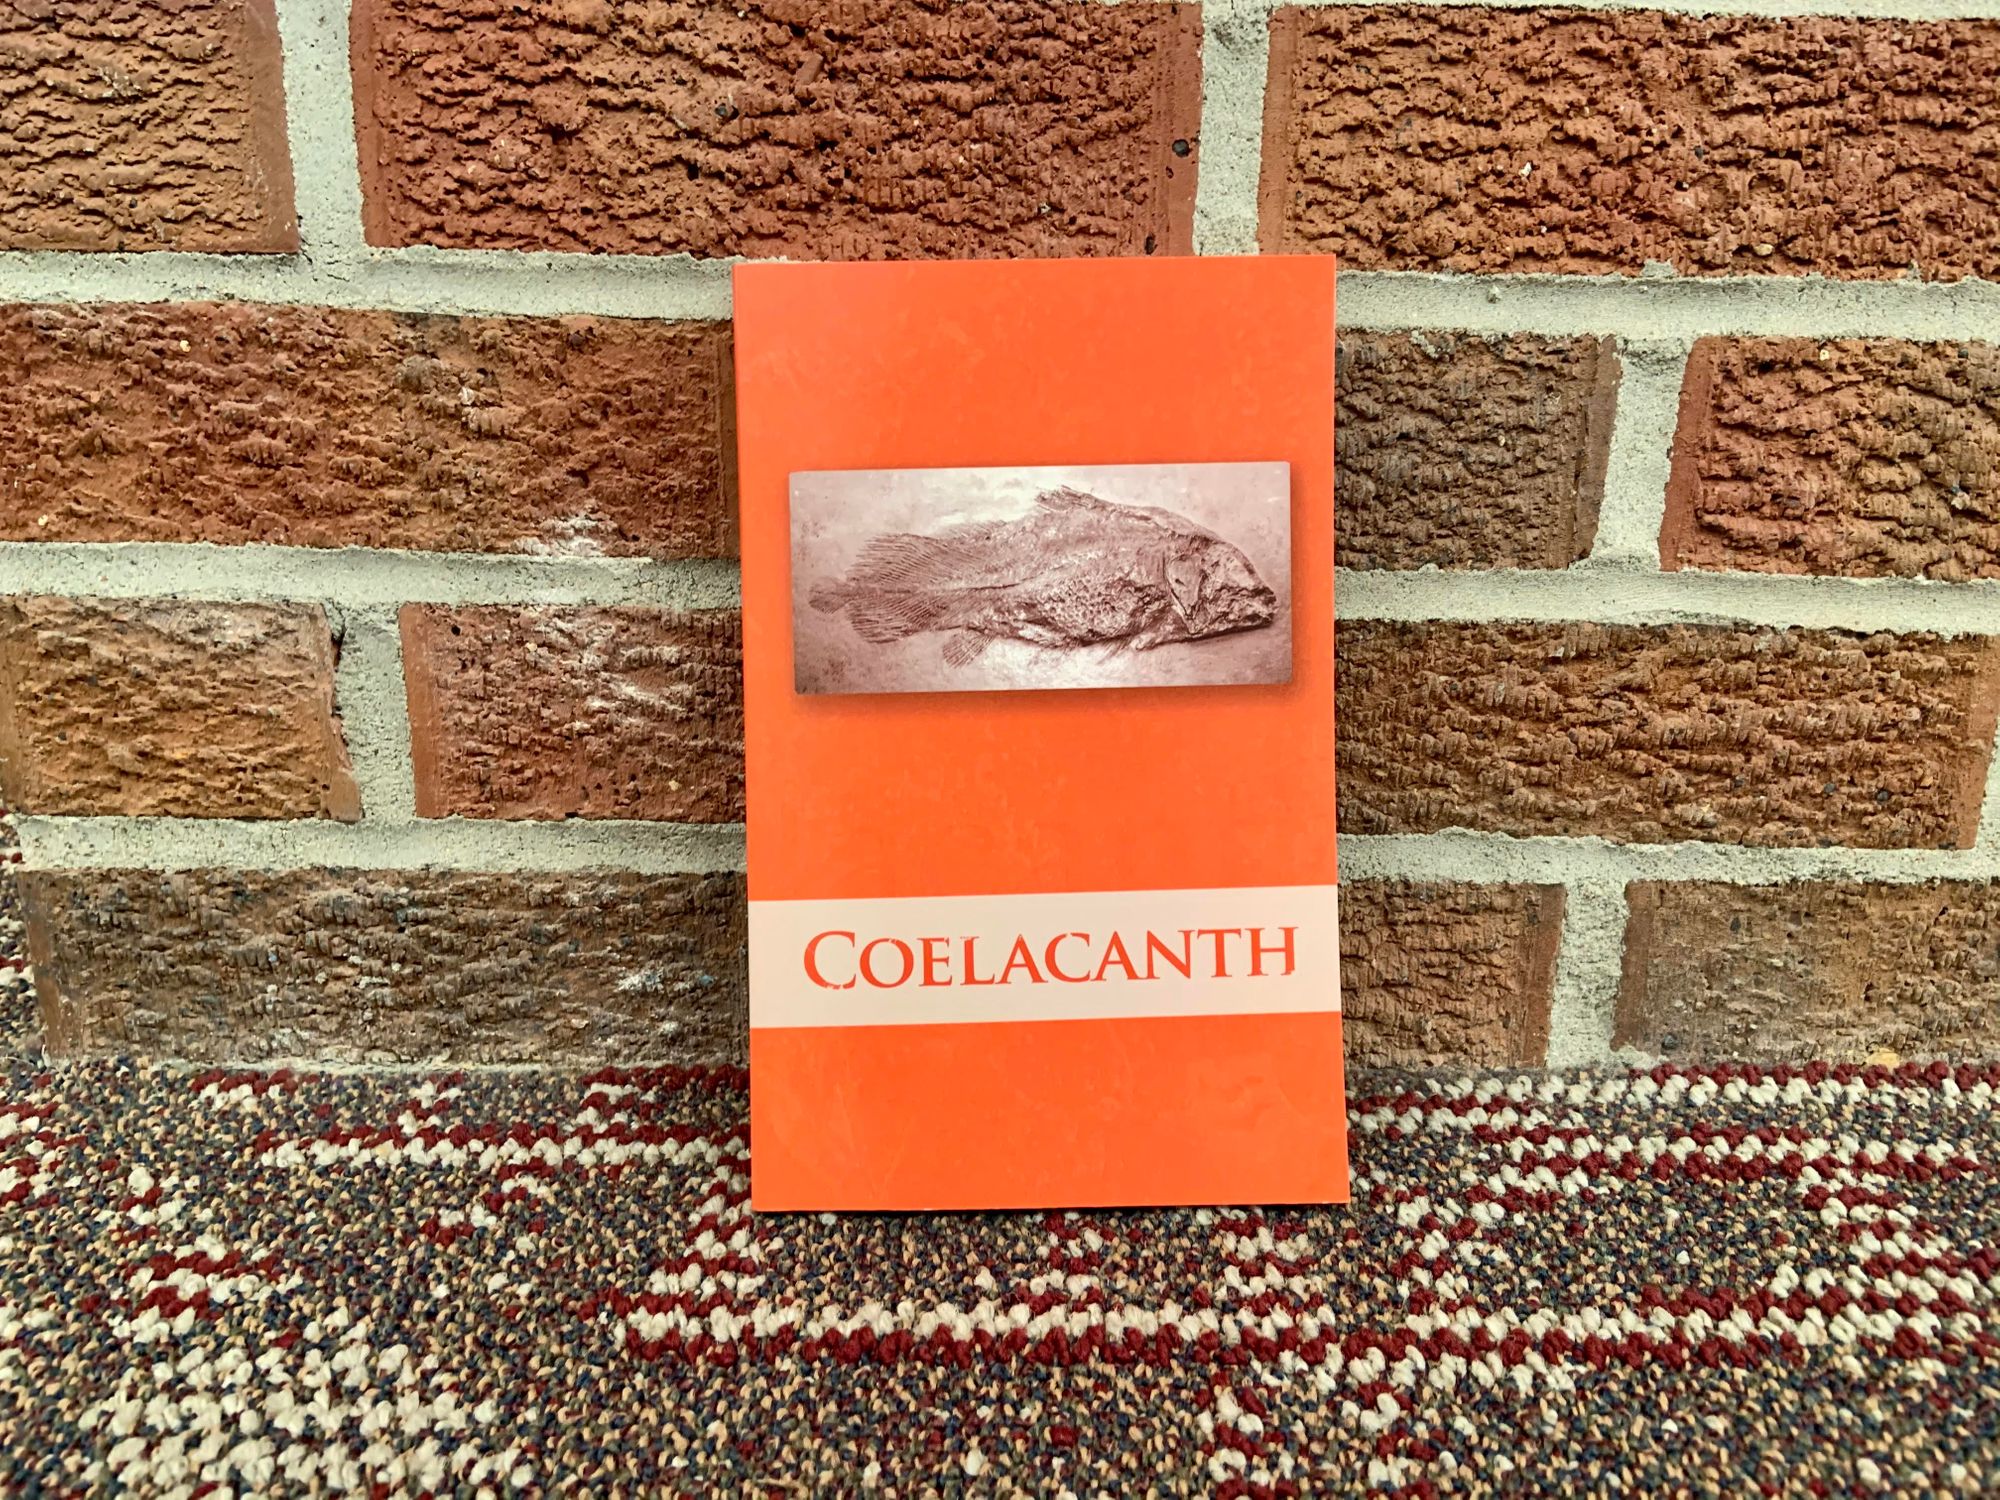 Coelacanth 2020 journal debuts after COVID-19 delays